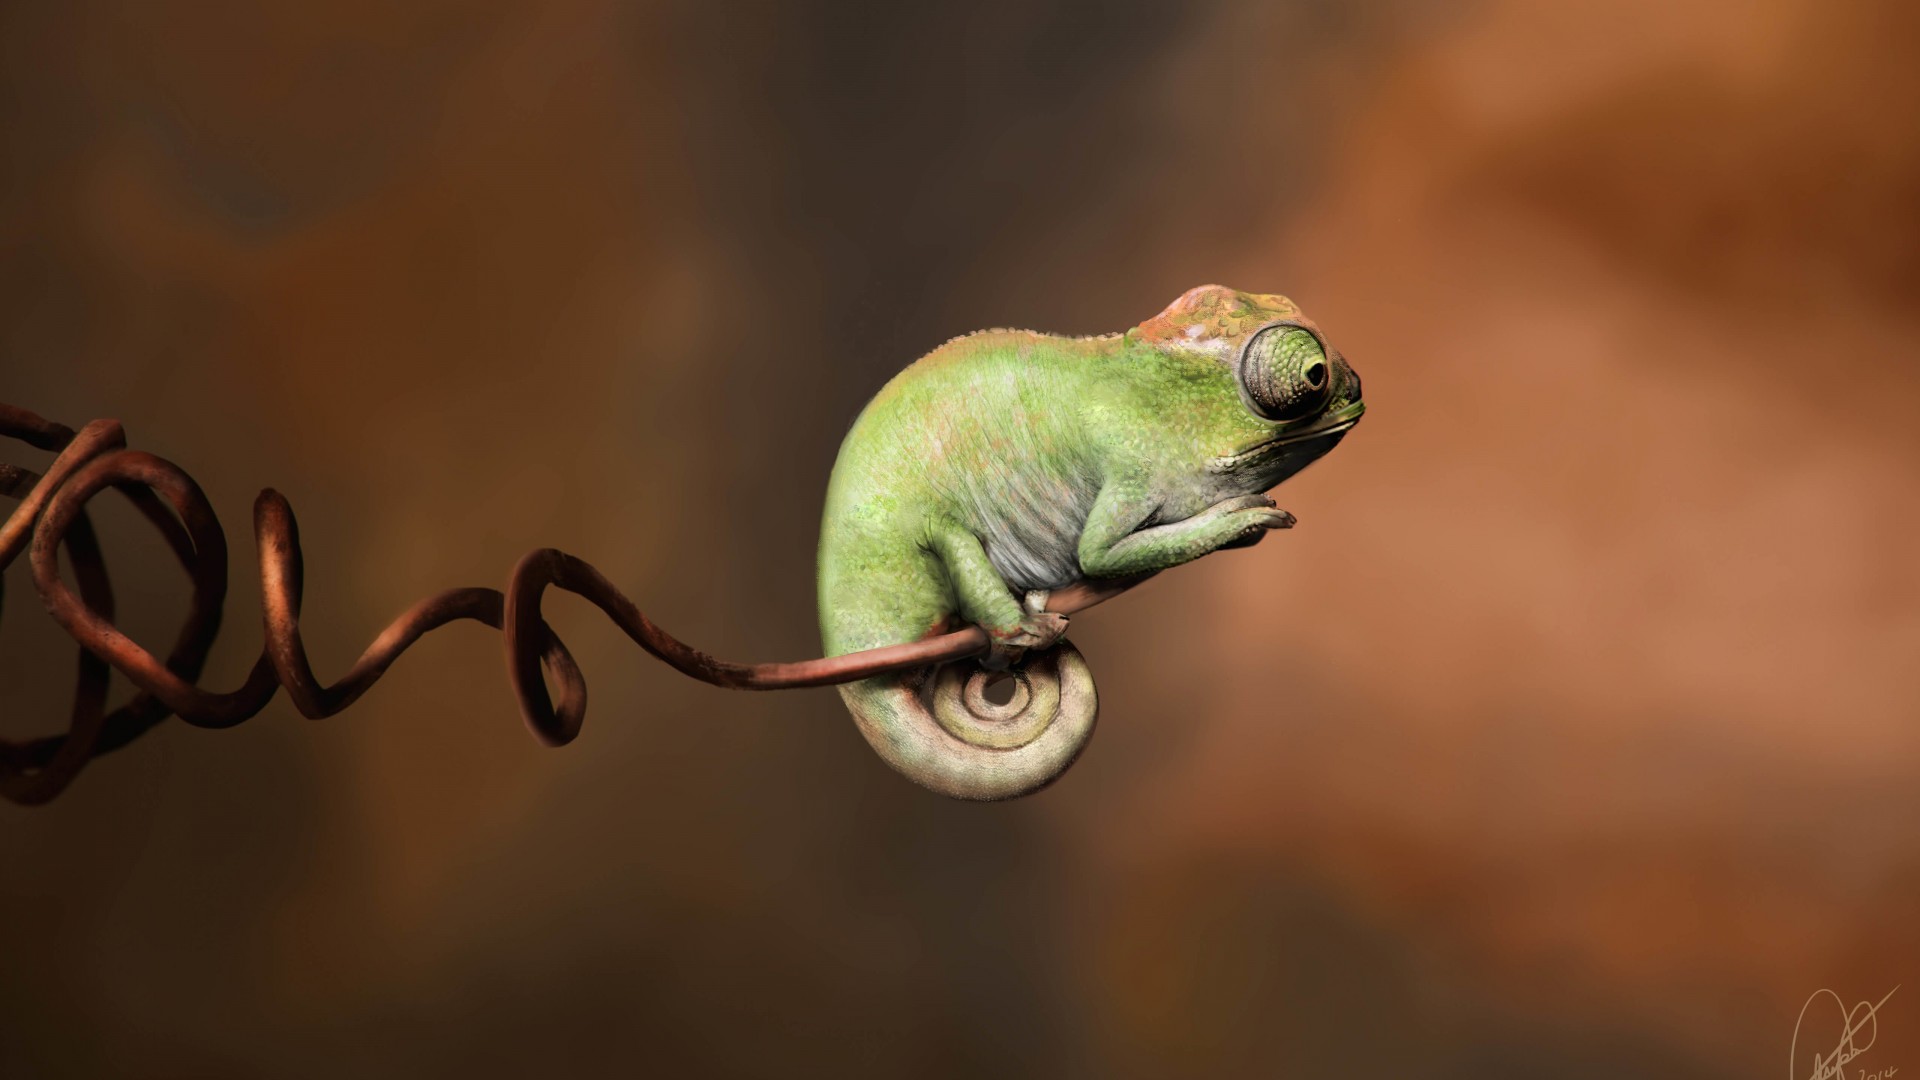 Baby Chameleon Perching On a Twisted Branch Wallpaper for Desktop 1920x1080